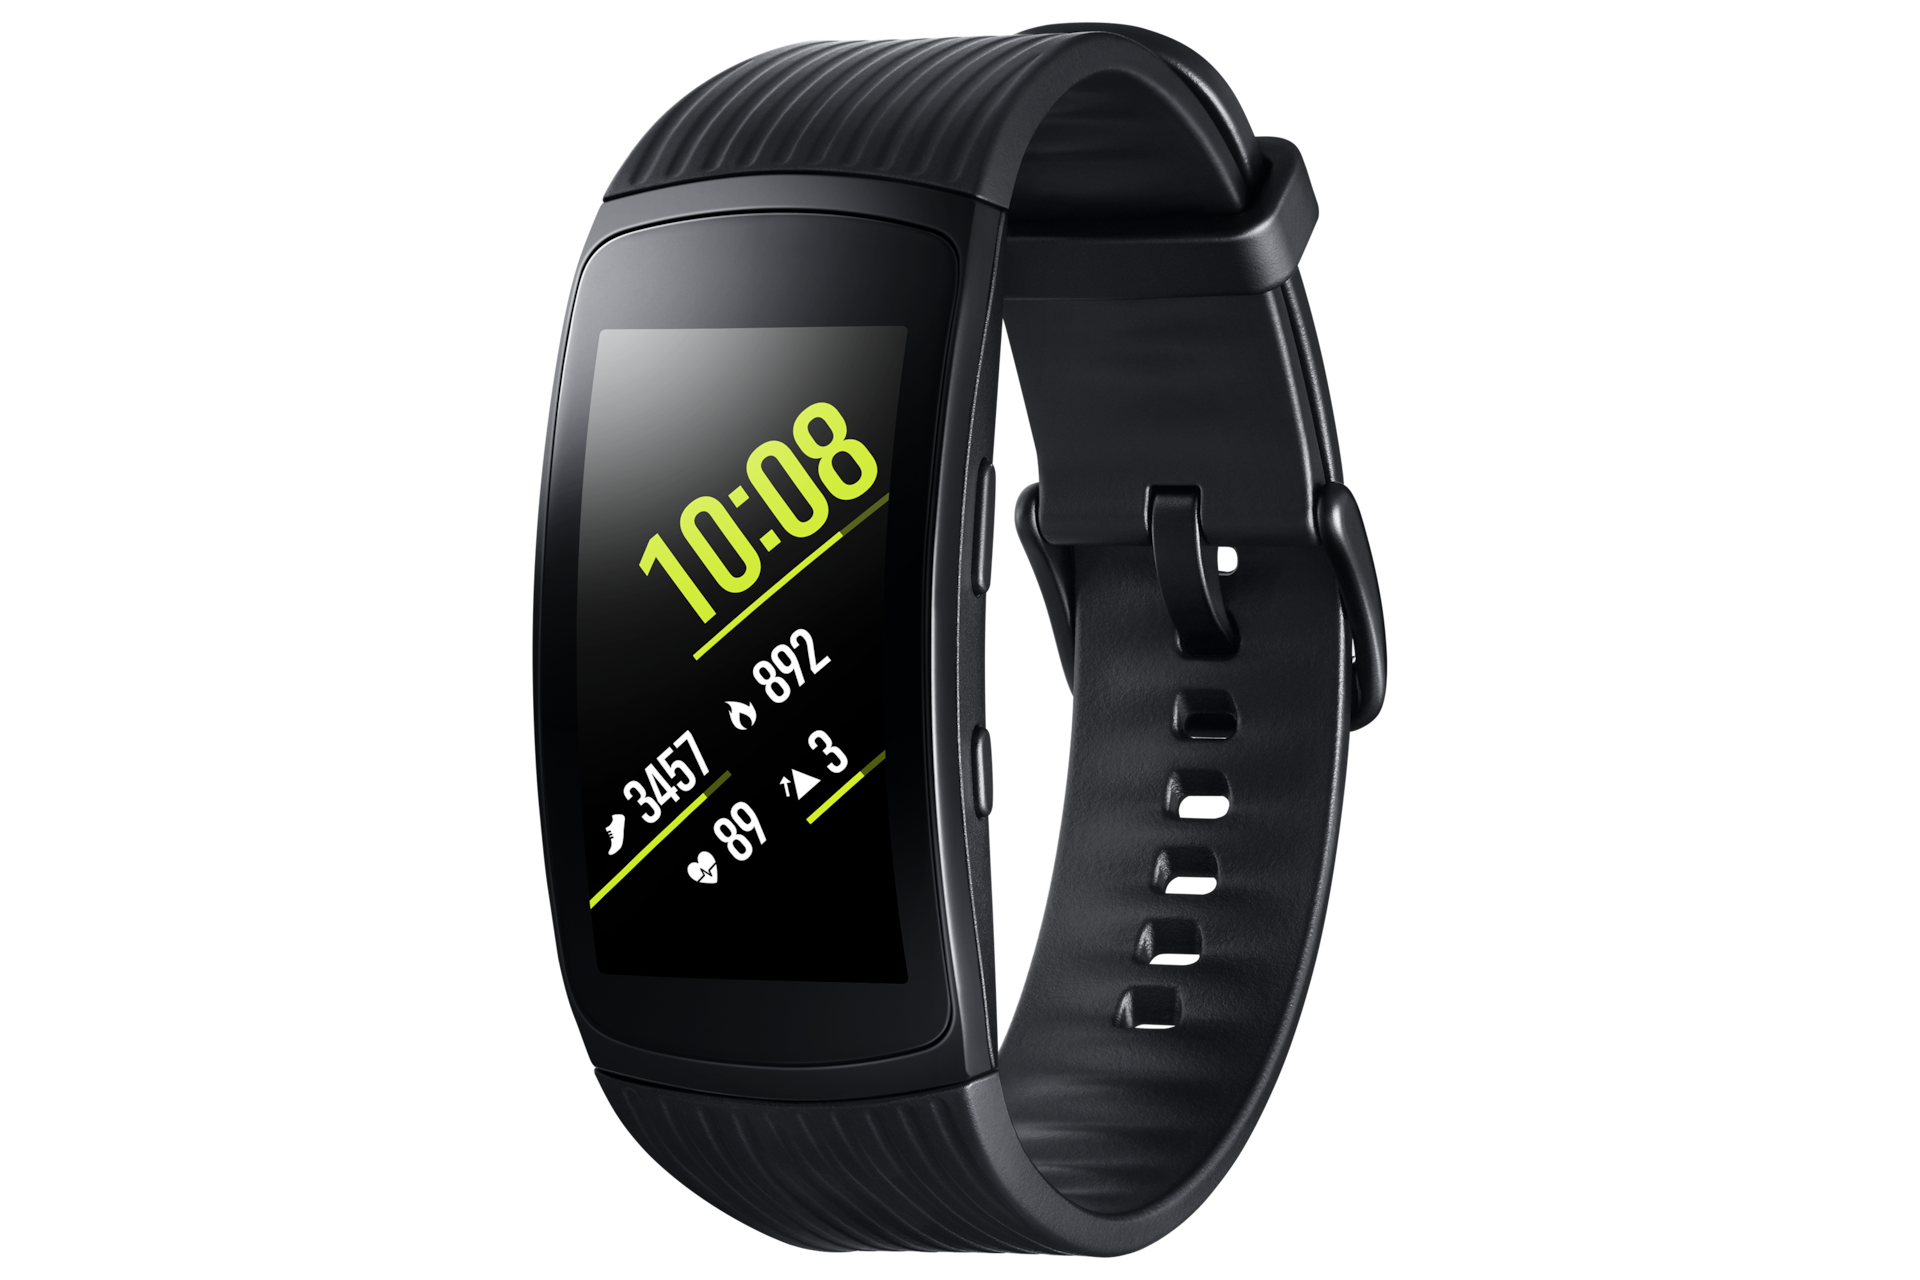 price of gear fit 2 pro